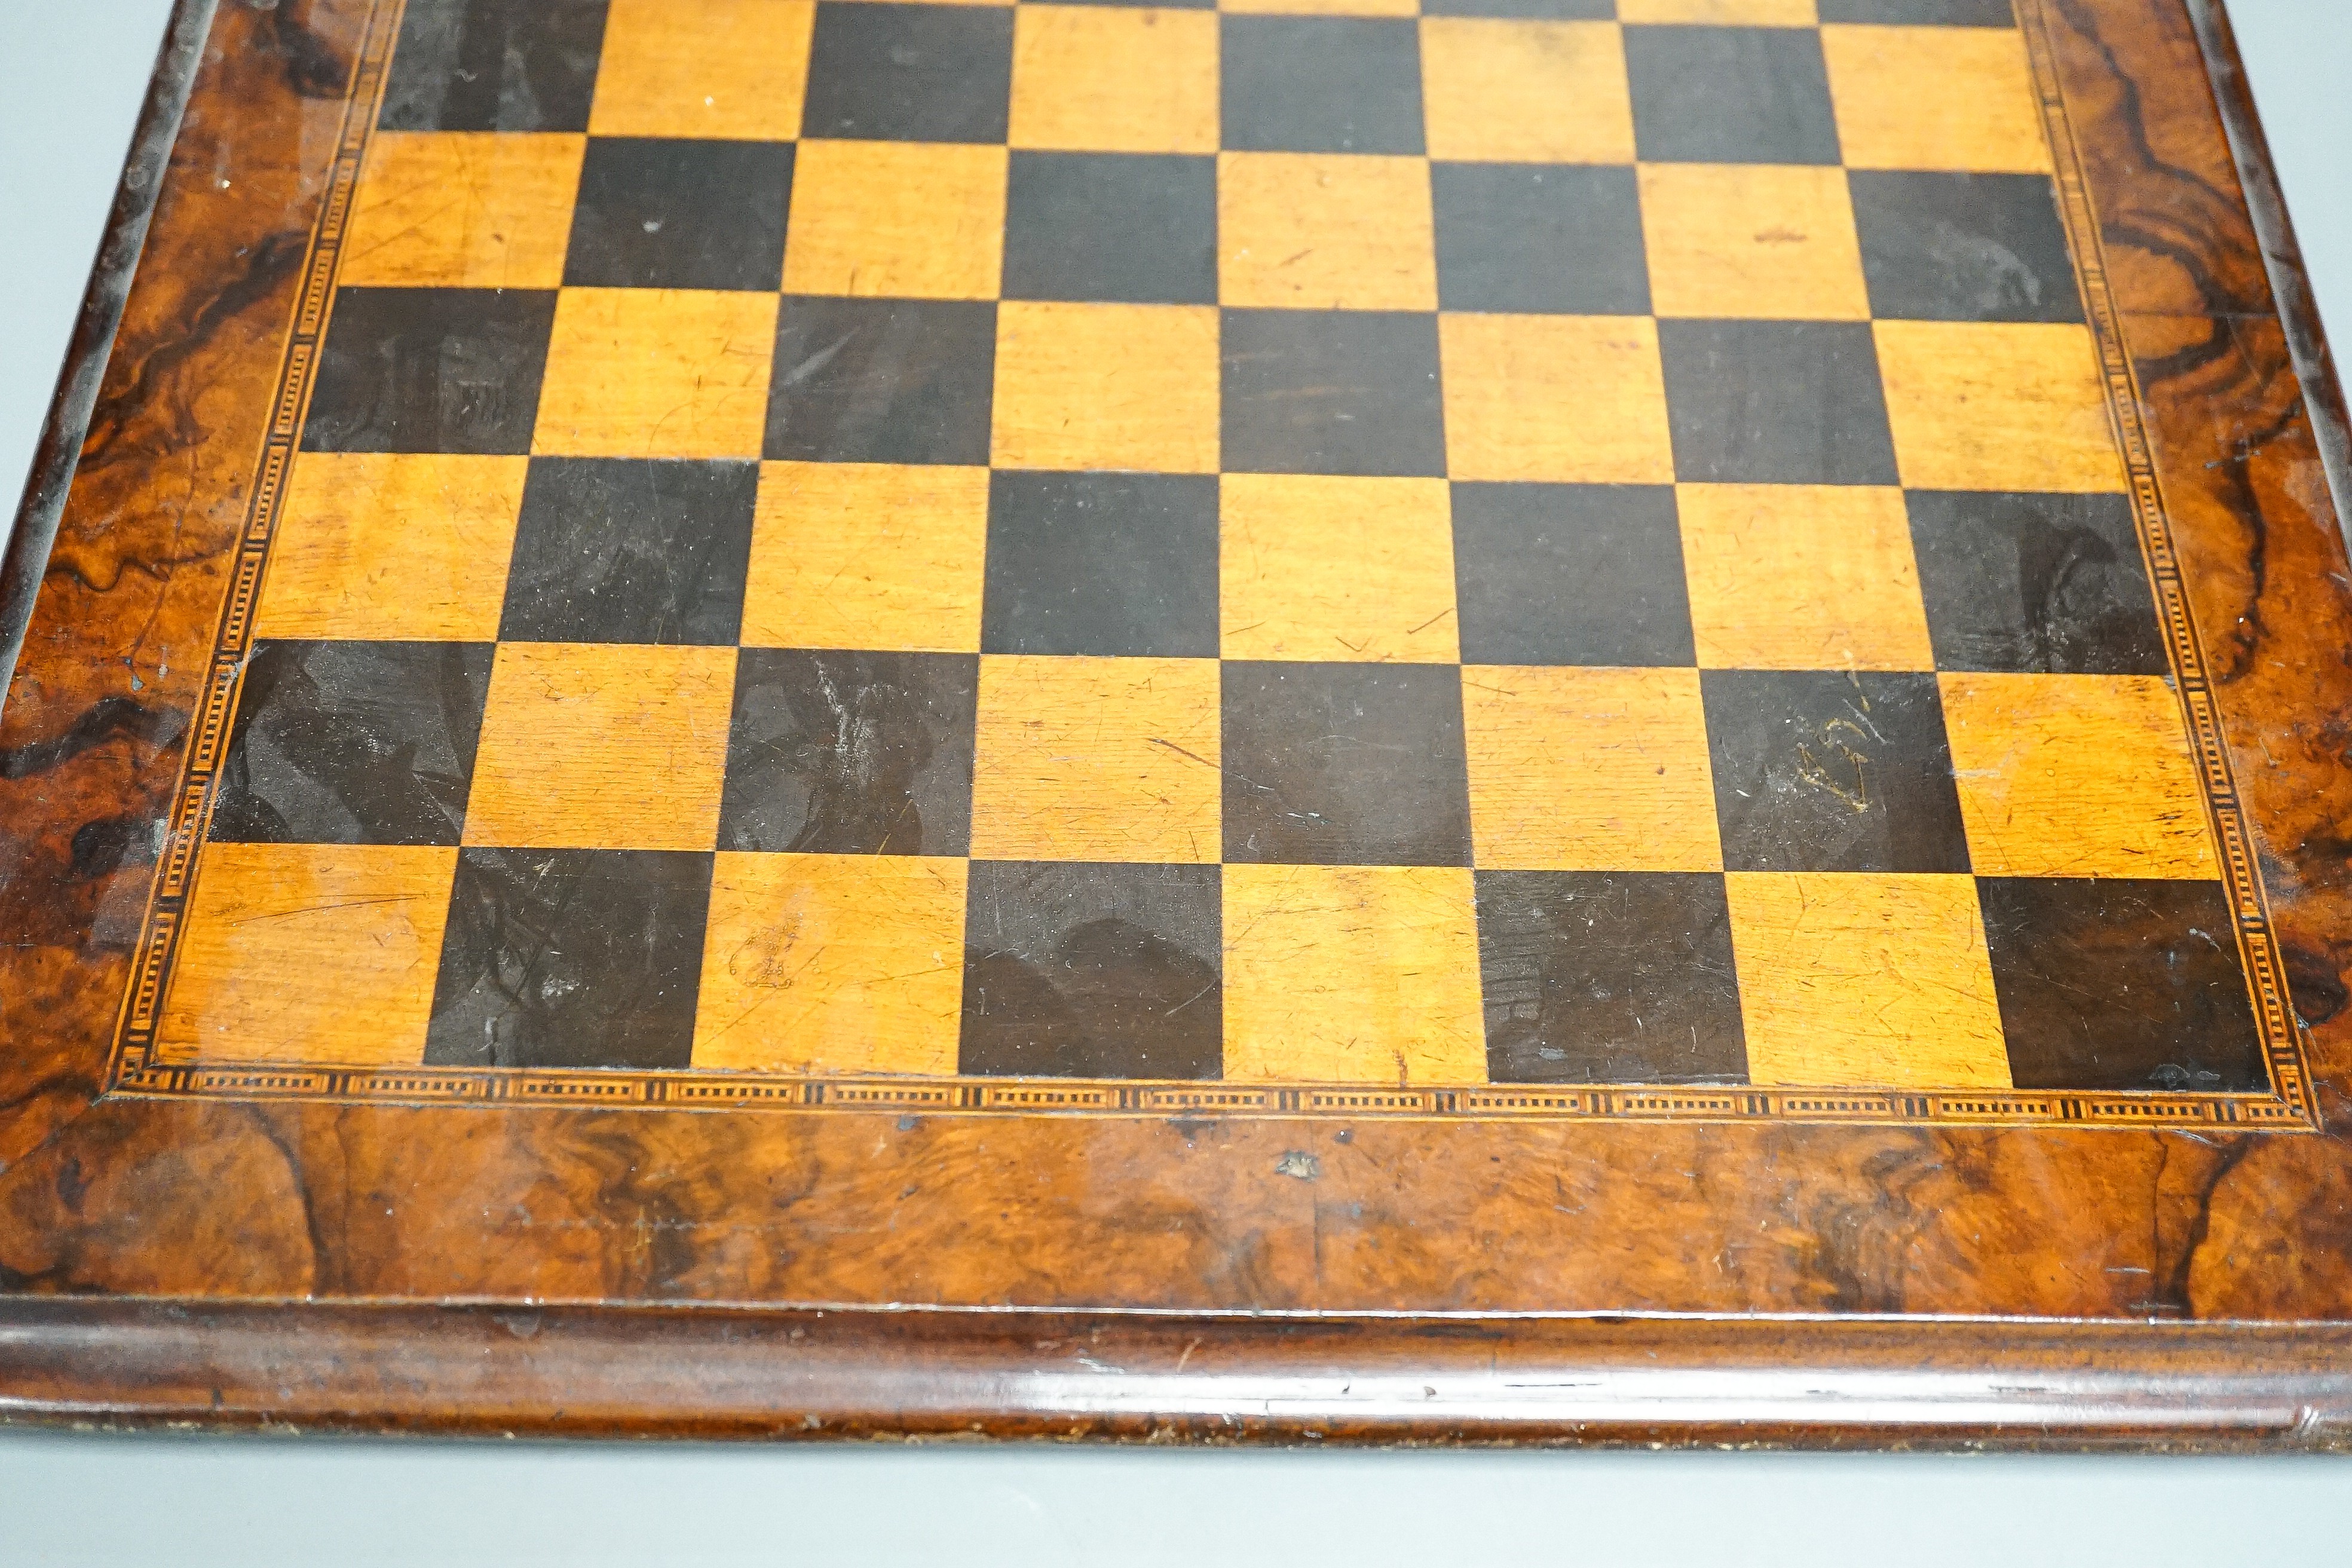 A late 19th century walnut, ebony and sycamore chessboard together with a box set of dominoes, chessboard 41cm x41cm